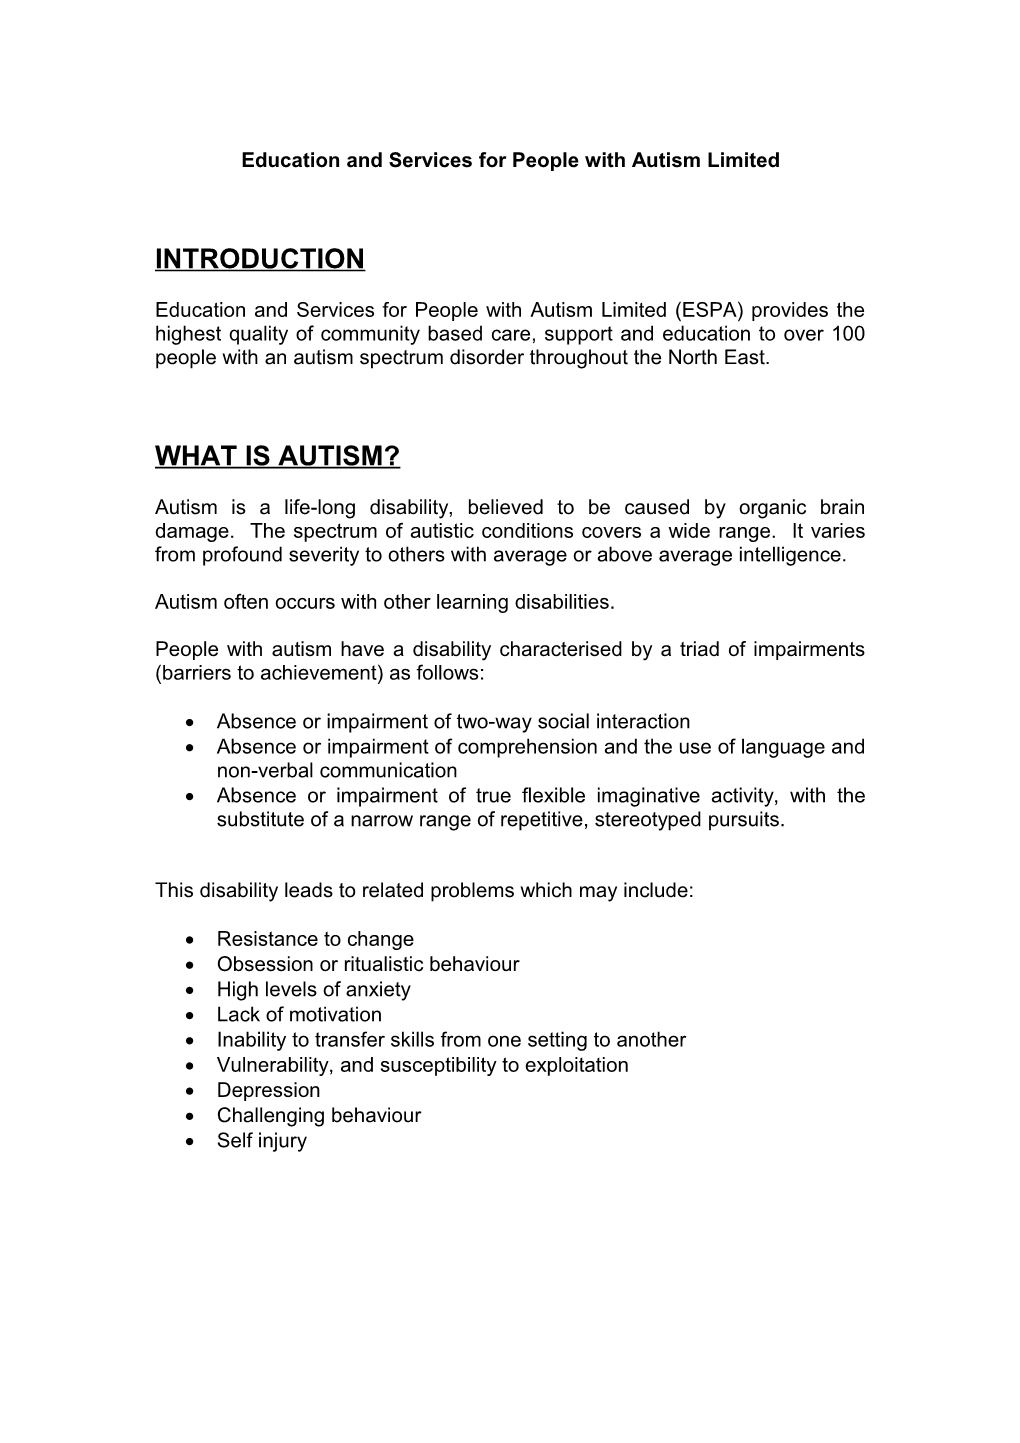 Education and Services for People with Autism Limited